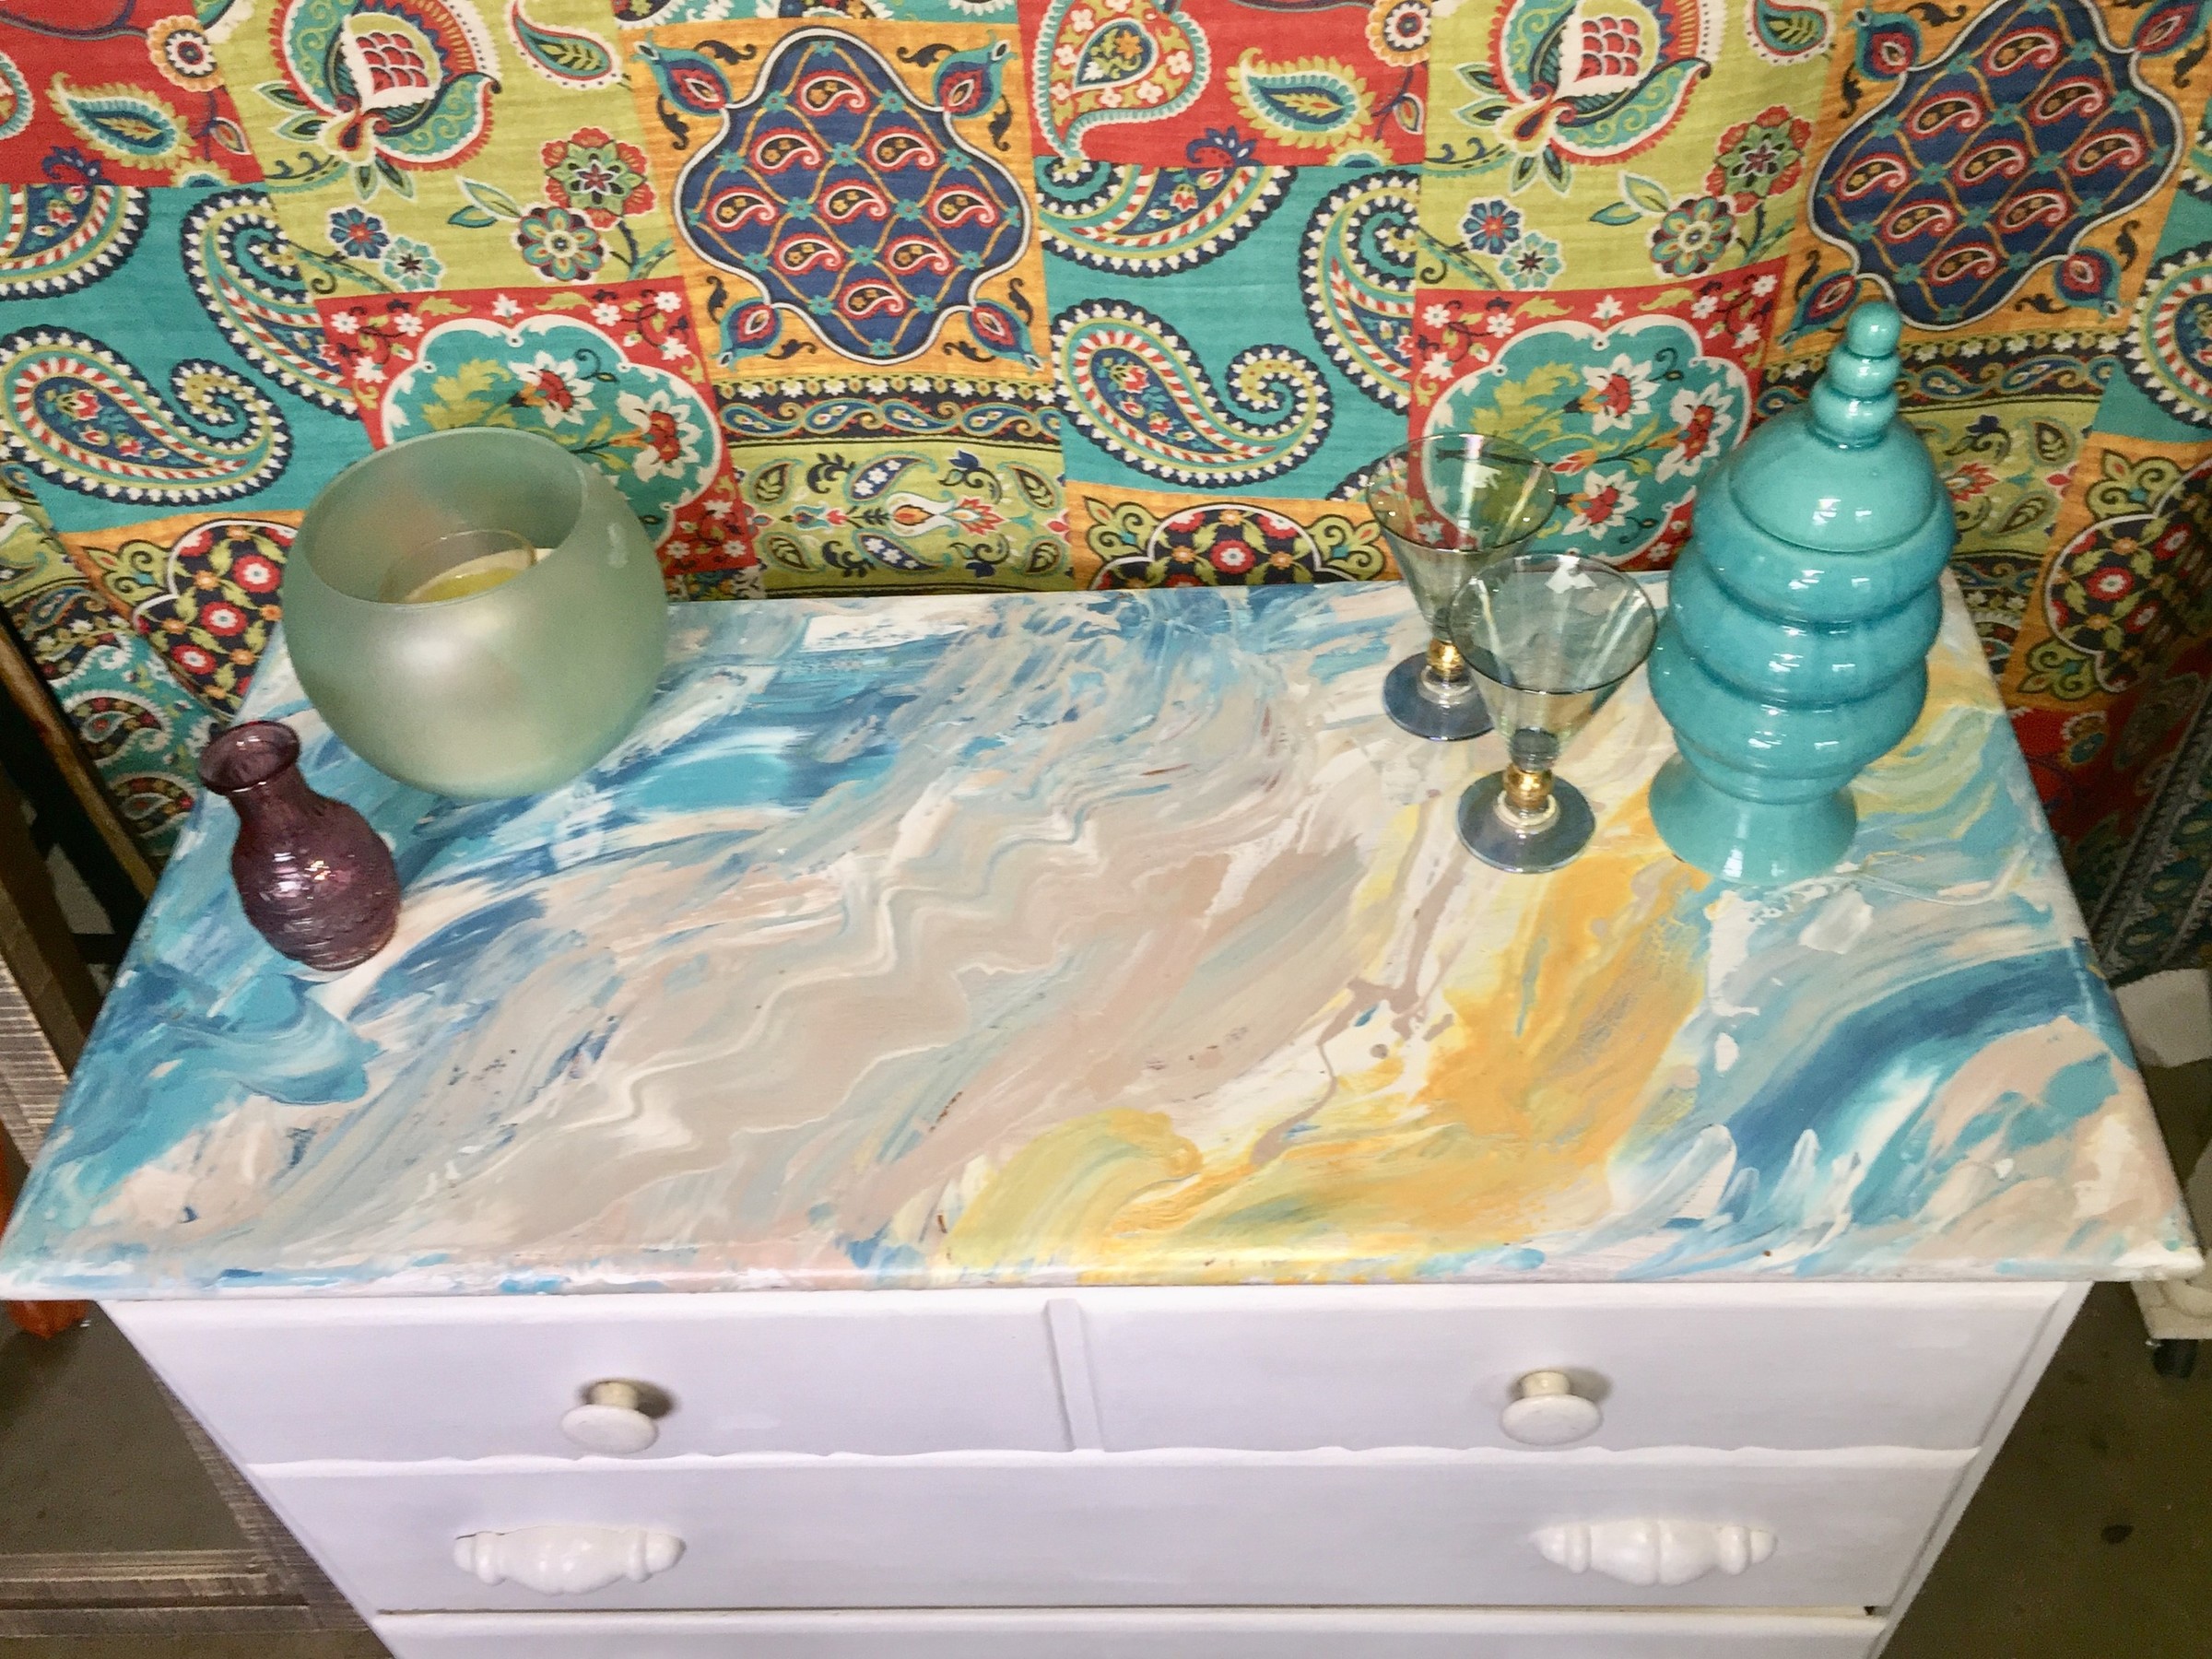 Tim's painted dresser adorned with stylish accessories